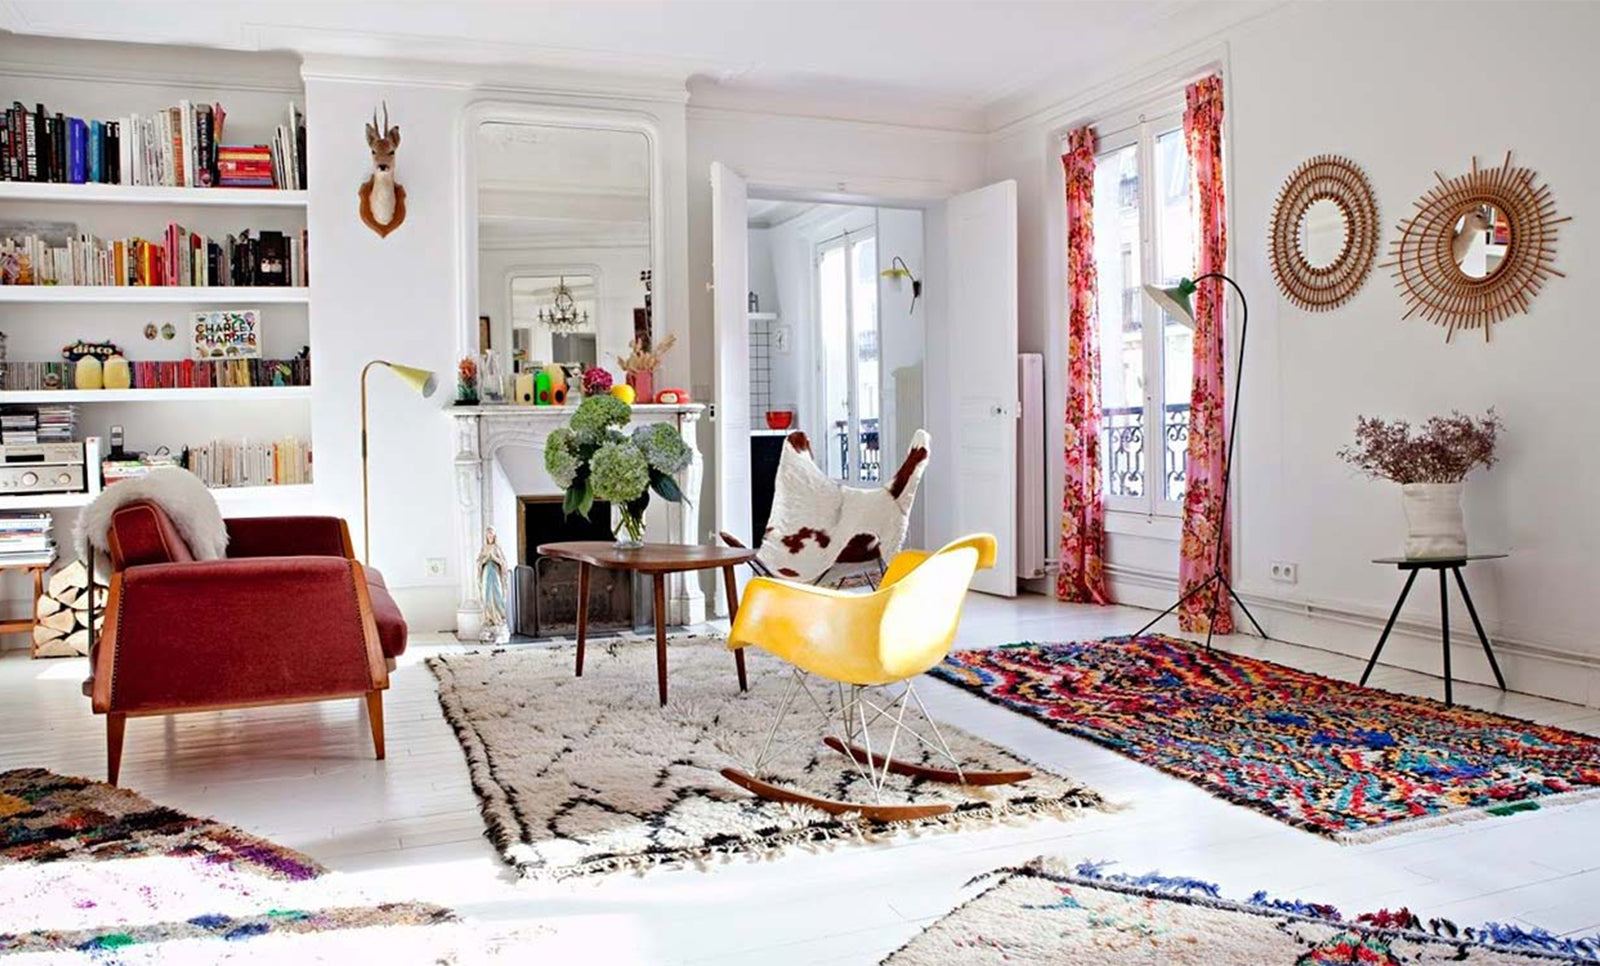 How to have an authentic Berber carpet from Morocco when you live in France?